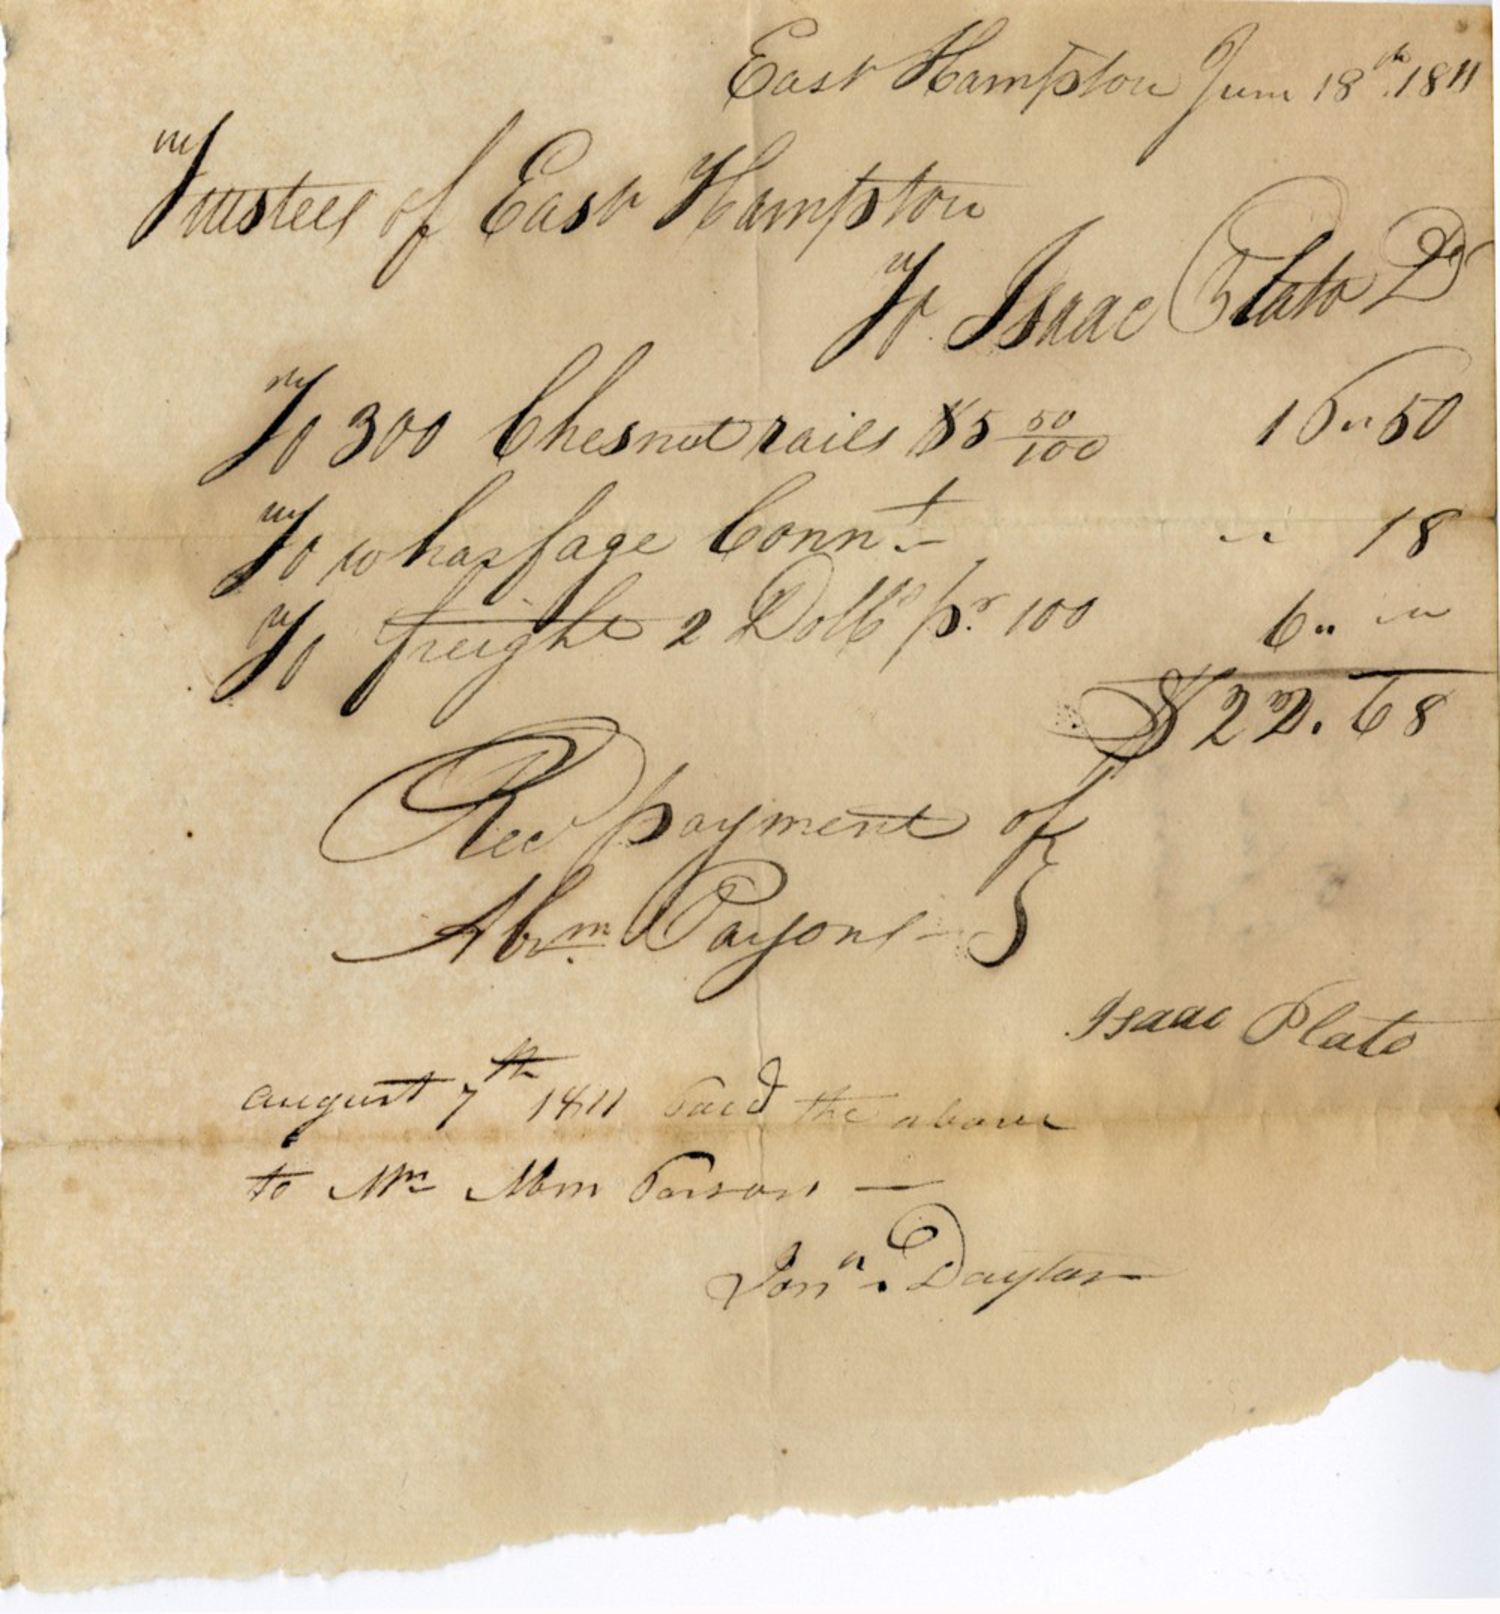 An 1811 from the Trustees of East Hampton to Isaac Plato, recording his payment for work with chestnut rails. Plato is one of several African American craftspeople who helped shape East Hampton's built environment that researcher Laini Farrare will speak about in her presentation. EAST HAMPTON LIBRARY LONG ISLAND COLLECTION